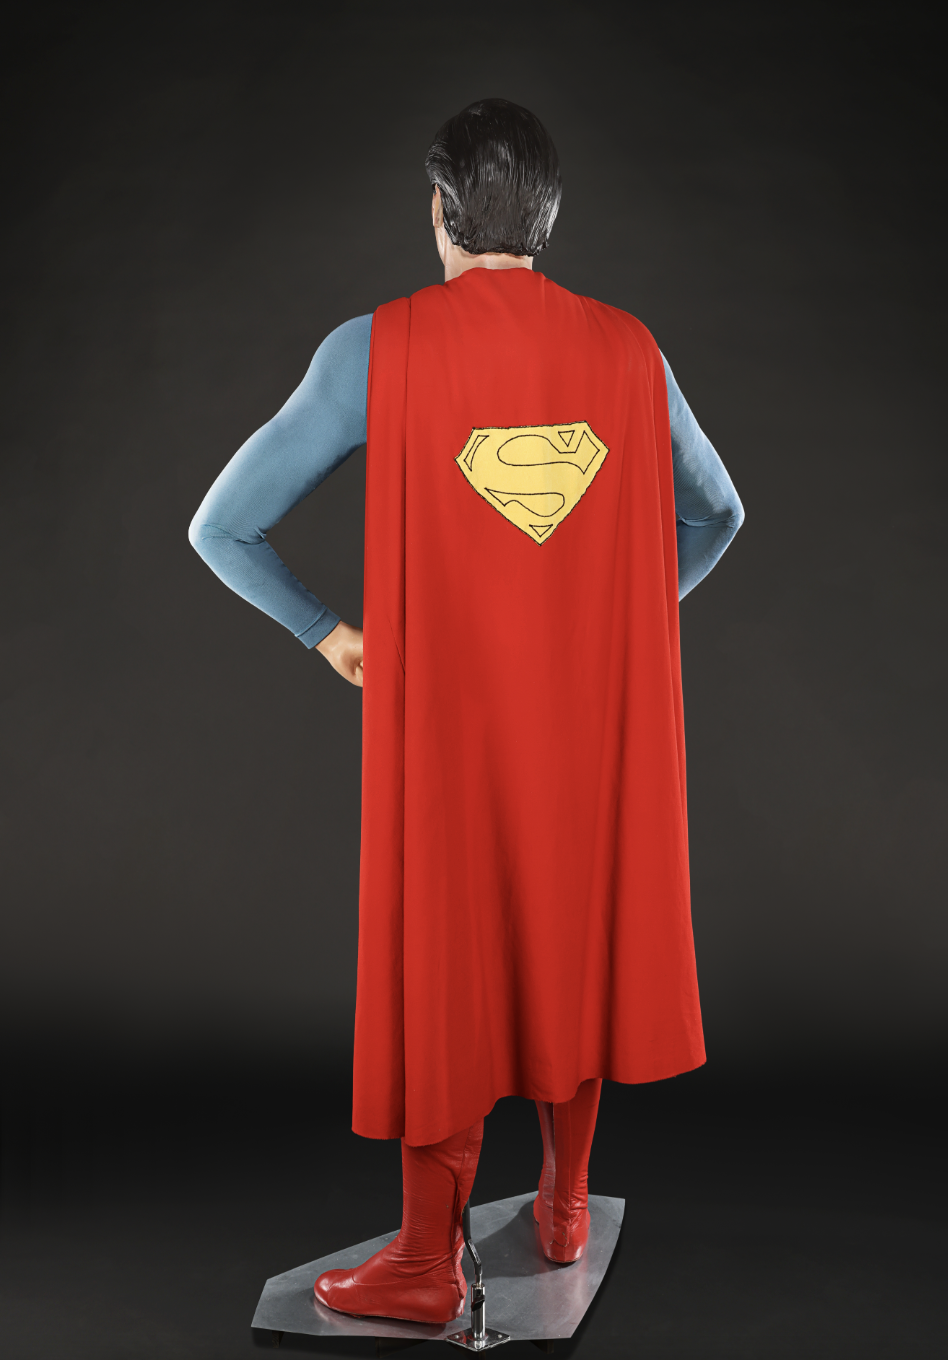 Auction sells 'Superman' costume worn by Christopher Reeve in